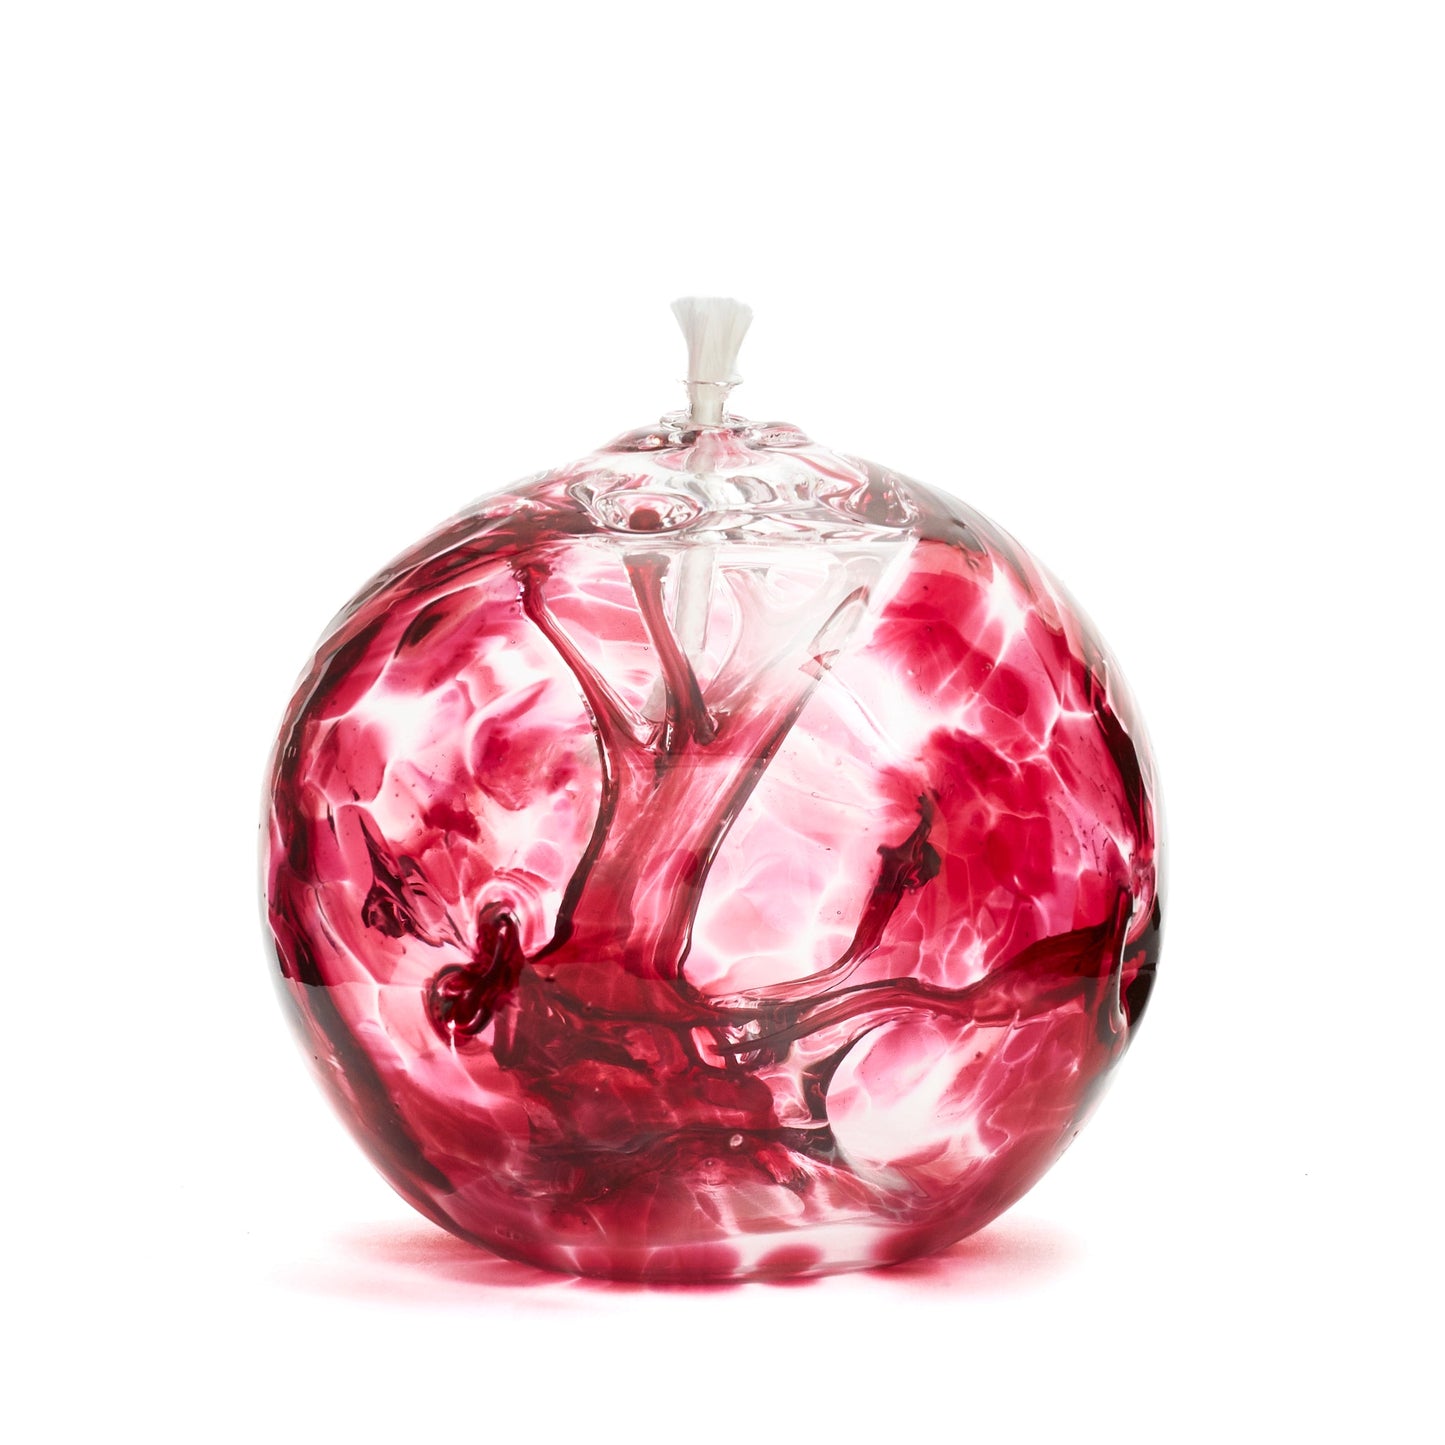 Handmade round cranberry glass oil lamp. Made in Ontario Canada by Gray Art Glass.